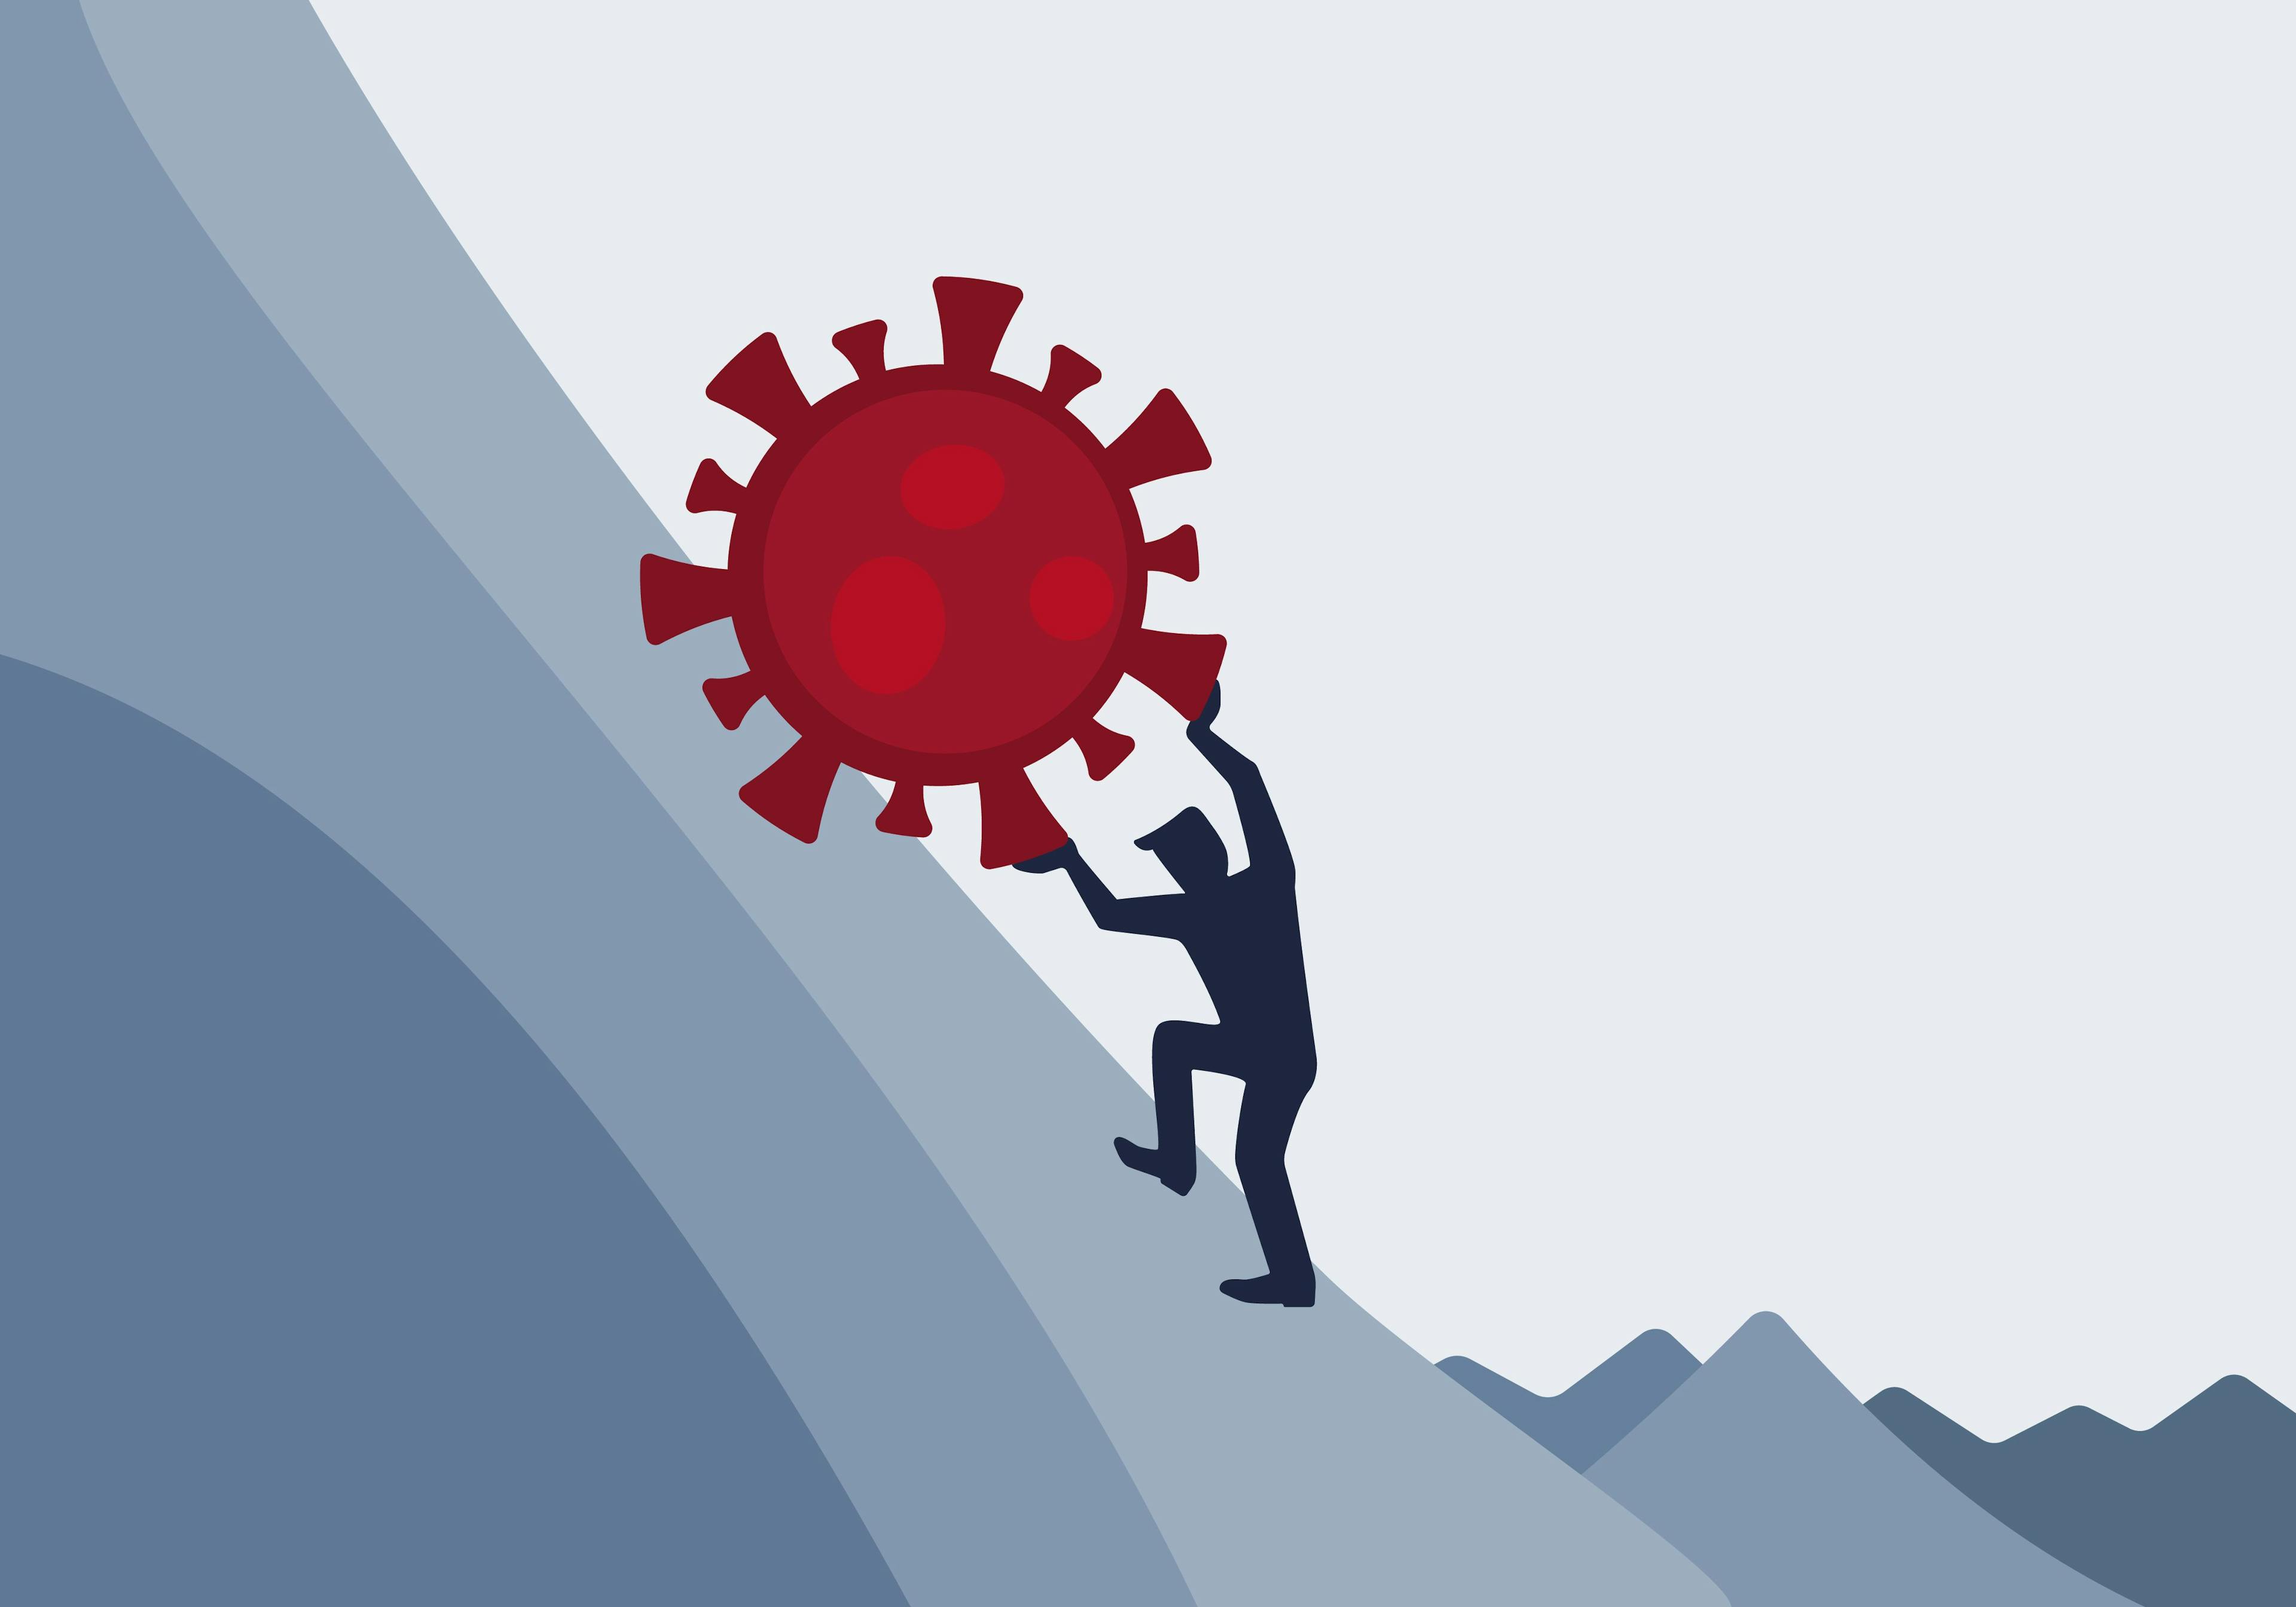 Long Covid patient with post viral fatigue syndrome pushing a metaphoric Coronavirus up a mountain in Sisyphus concept vector | Image Credit: © THP Creative - stock.adobe.com